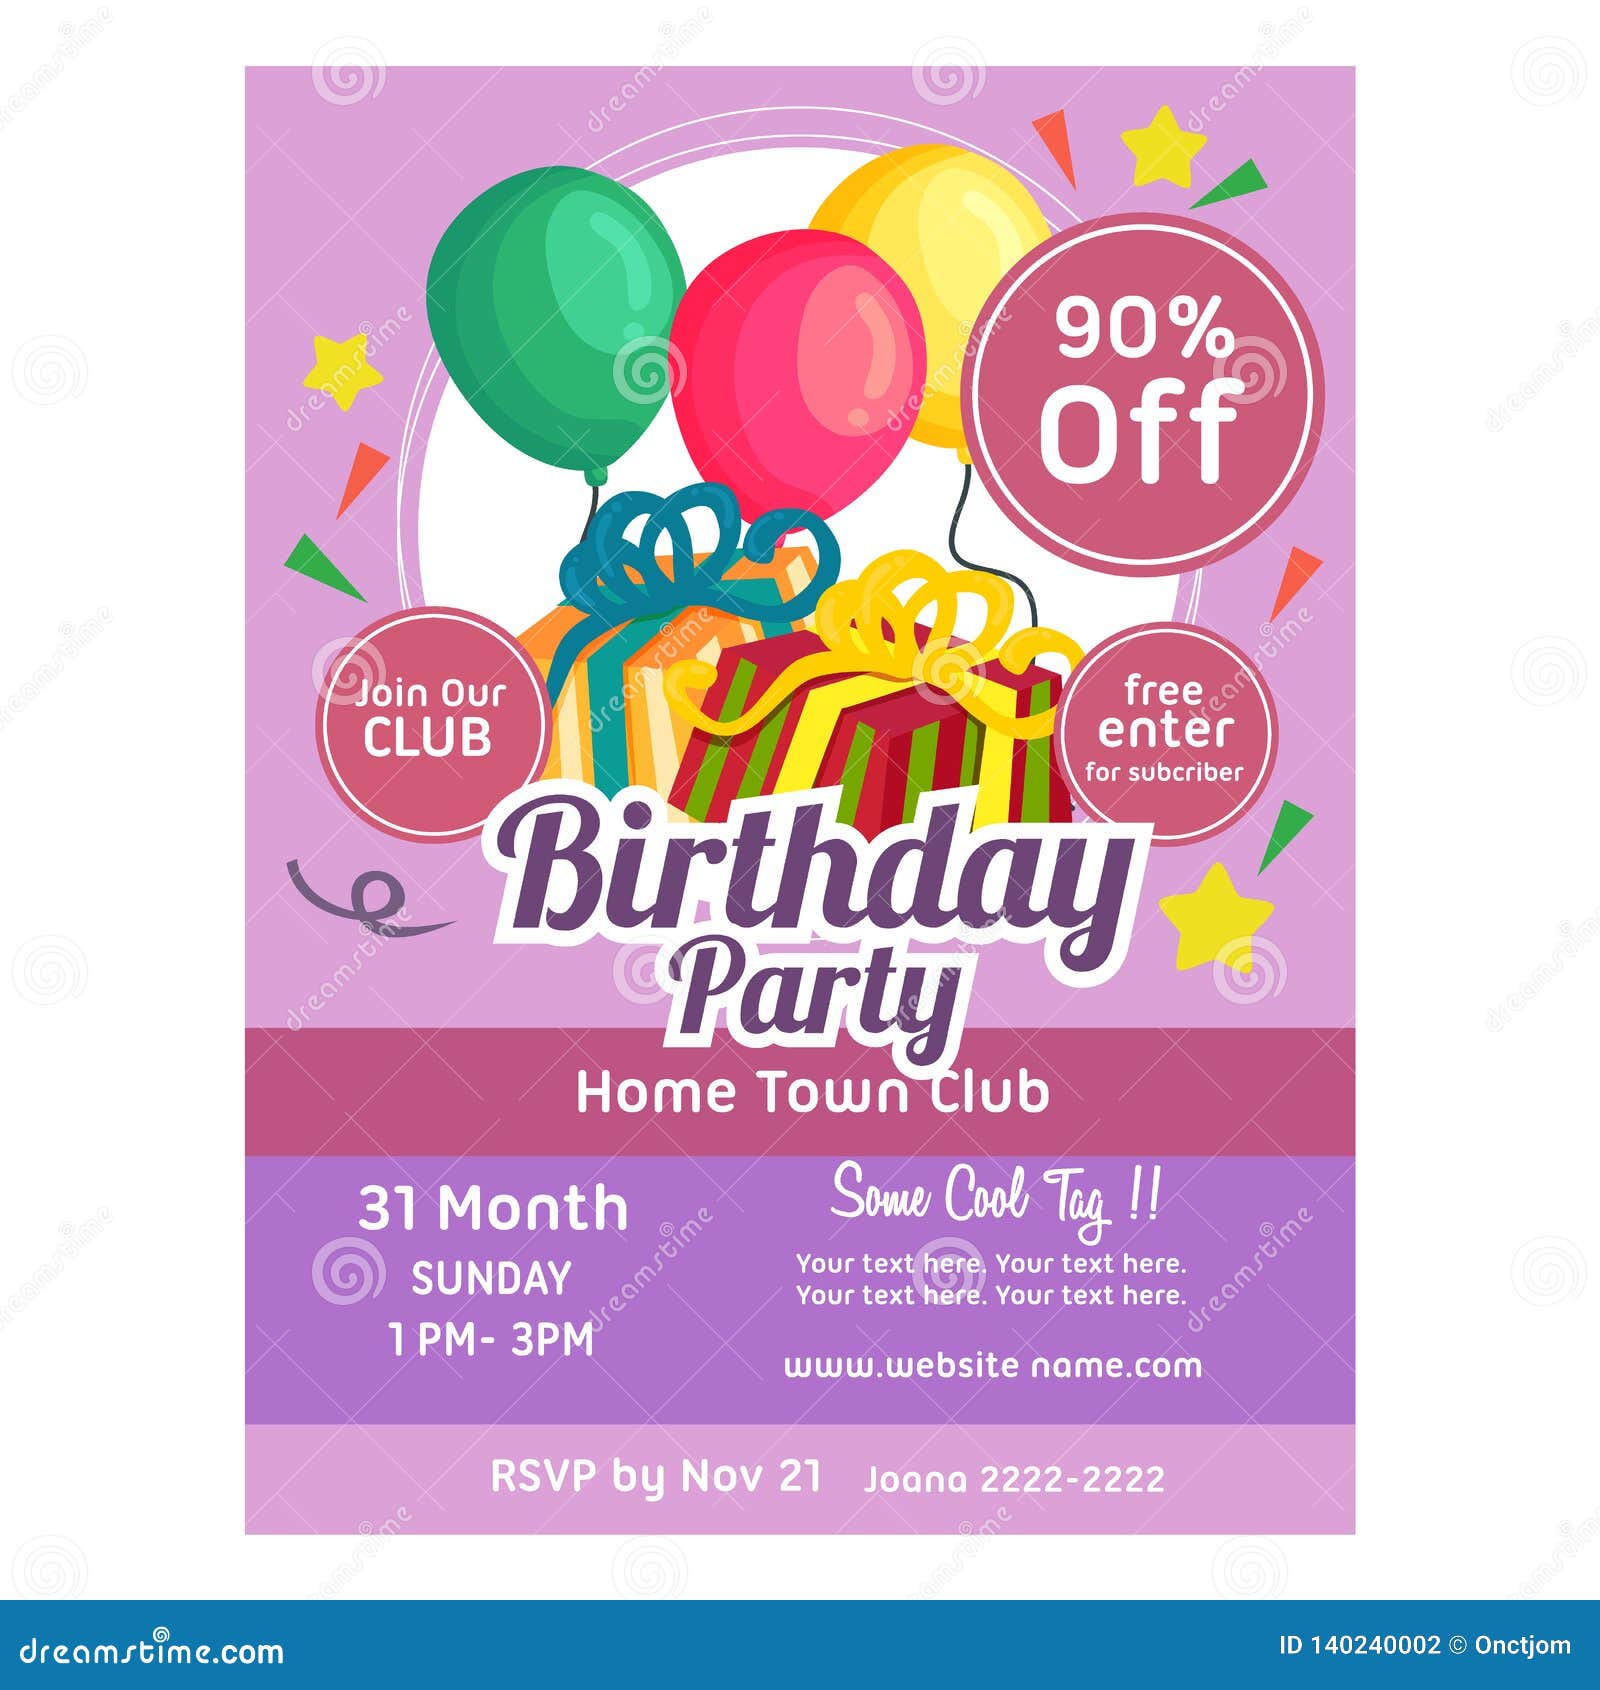 Indoor Balloon Decoration Festival Poster Background Design Backgrounds |  PSD Free Download - Pikbest